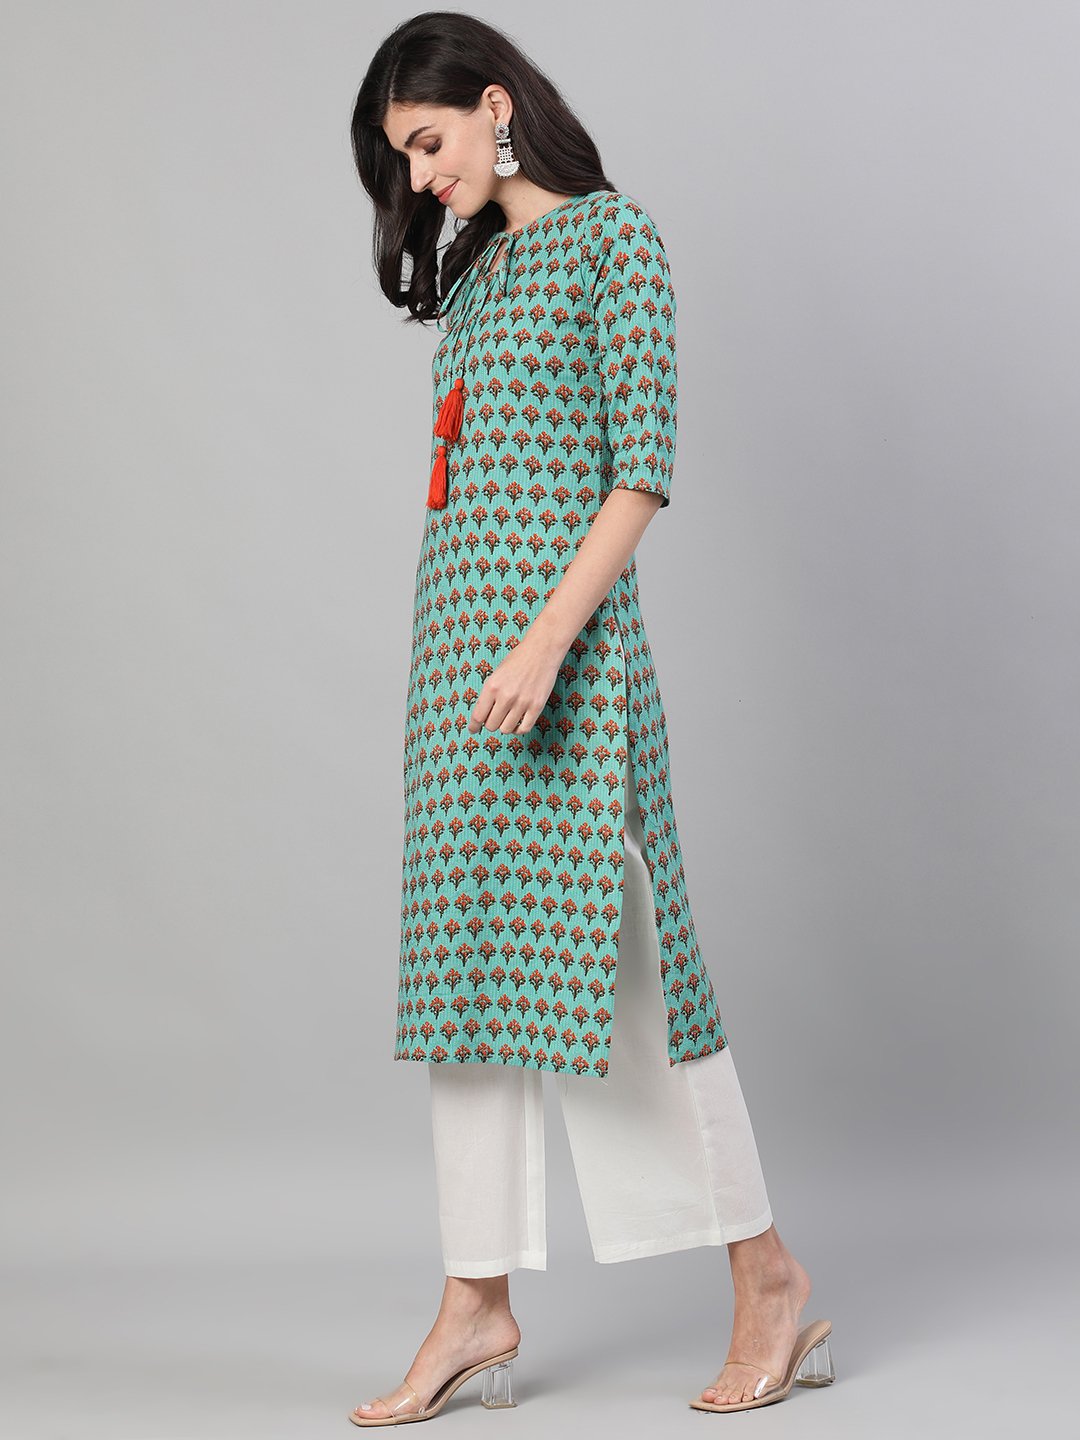 Women's Green Calf Length Three-Quarter Sleeves Straight Floral Printed Cotton Kurta With Pockets - Nayo Clothing